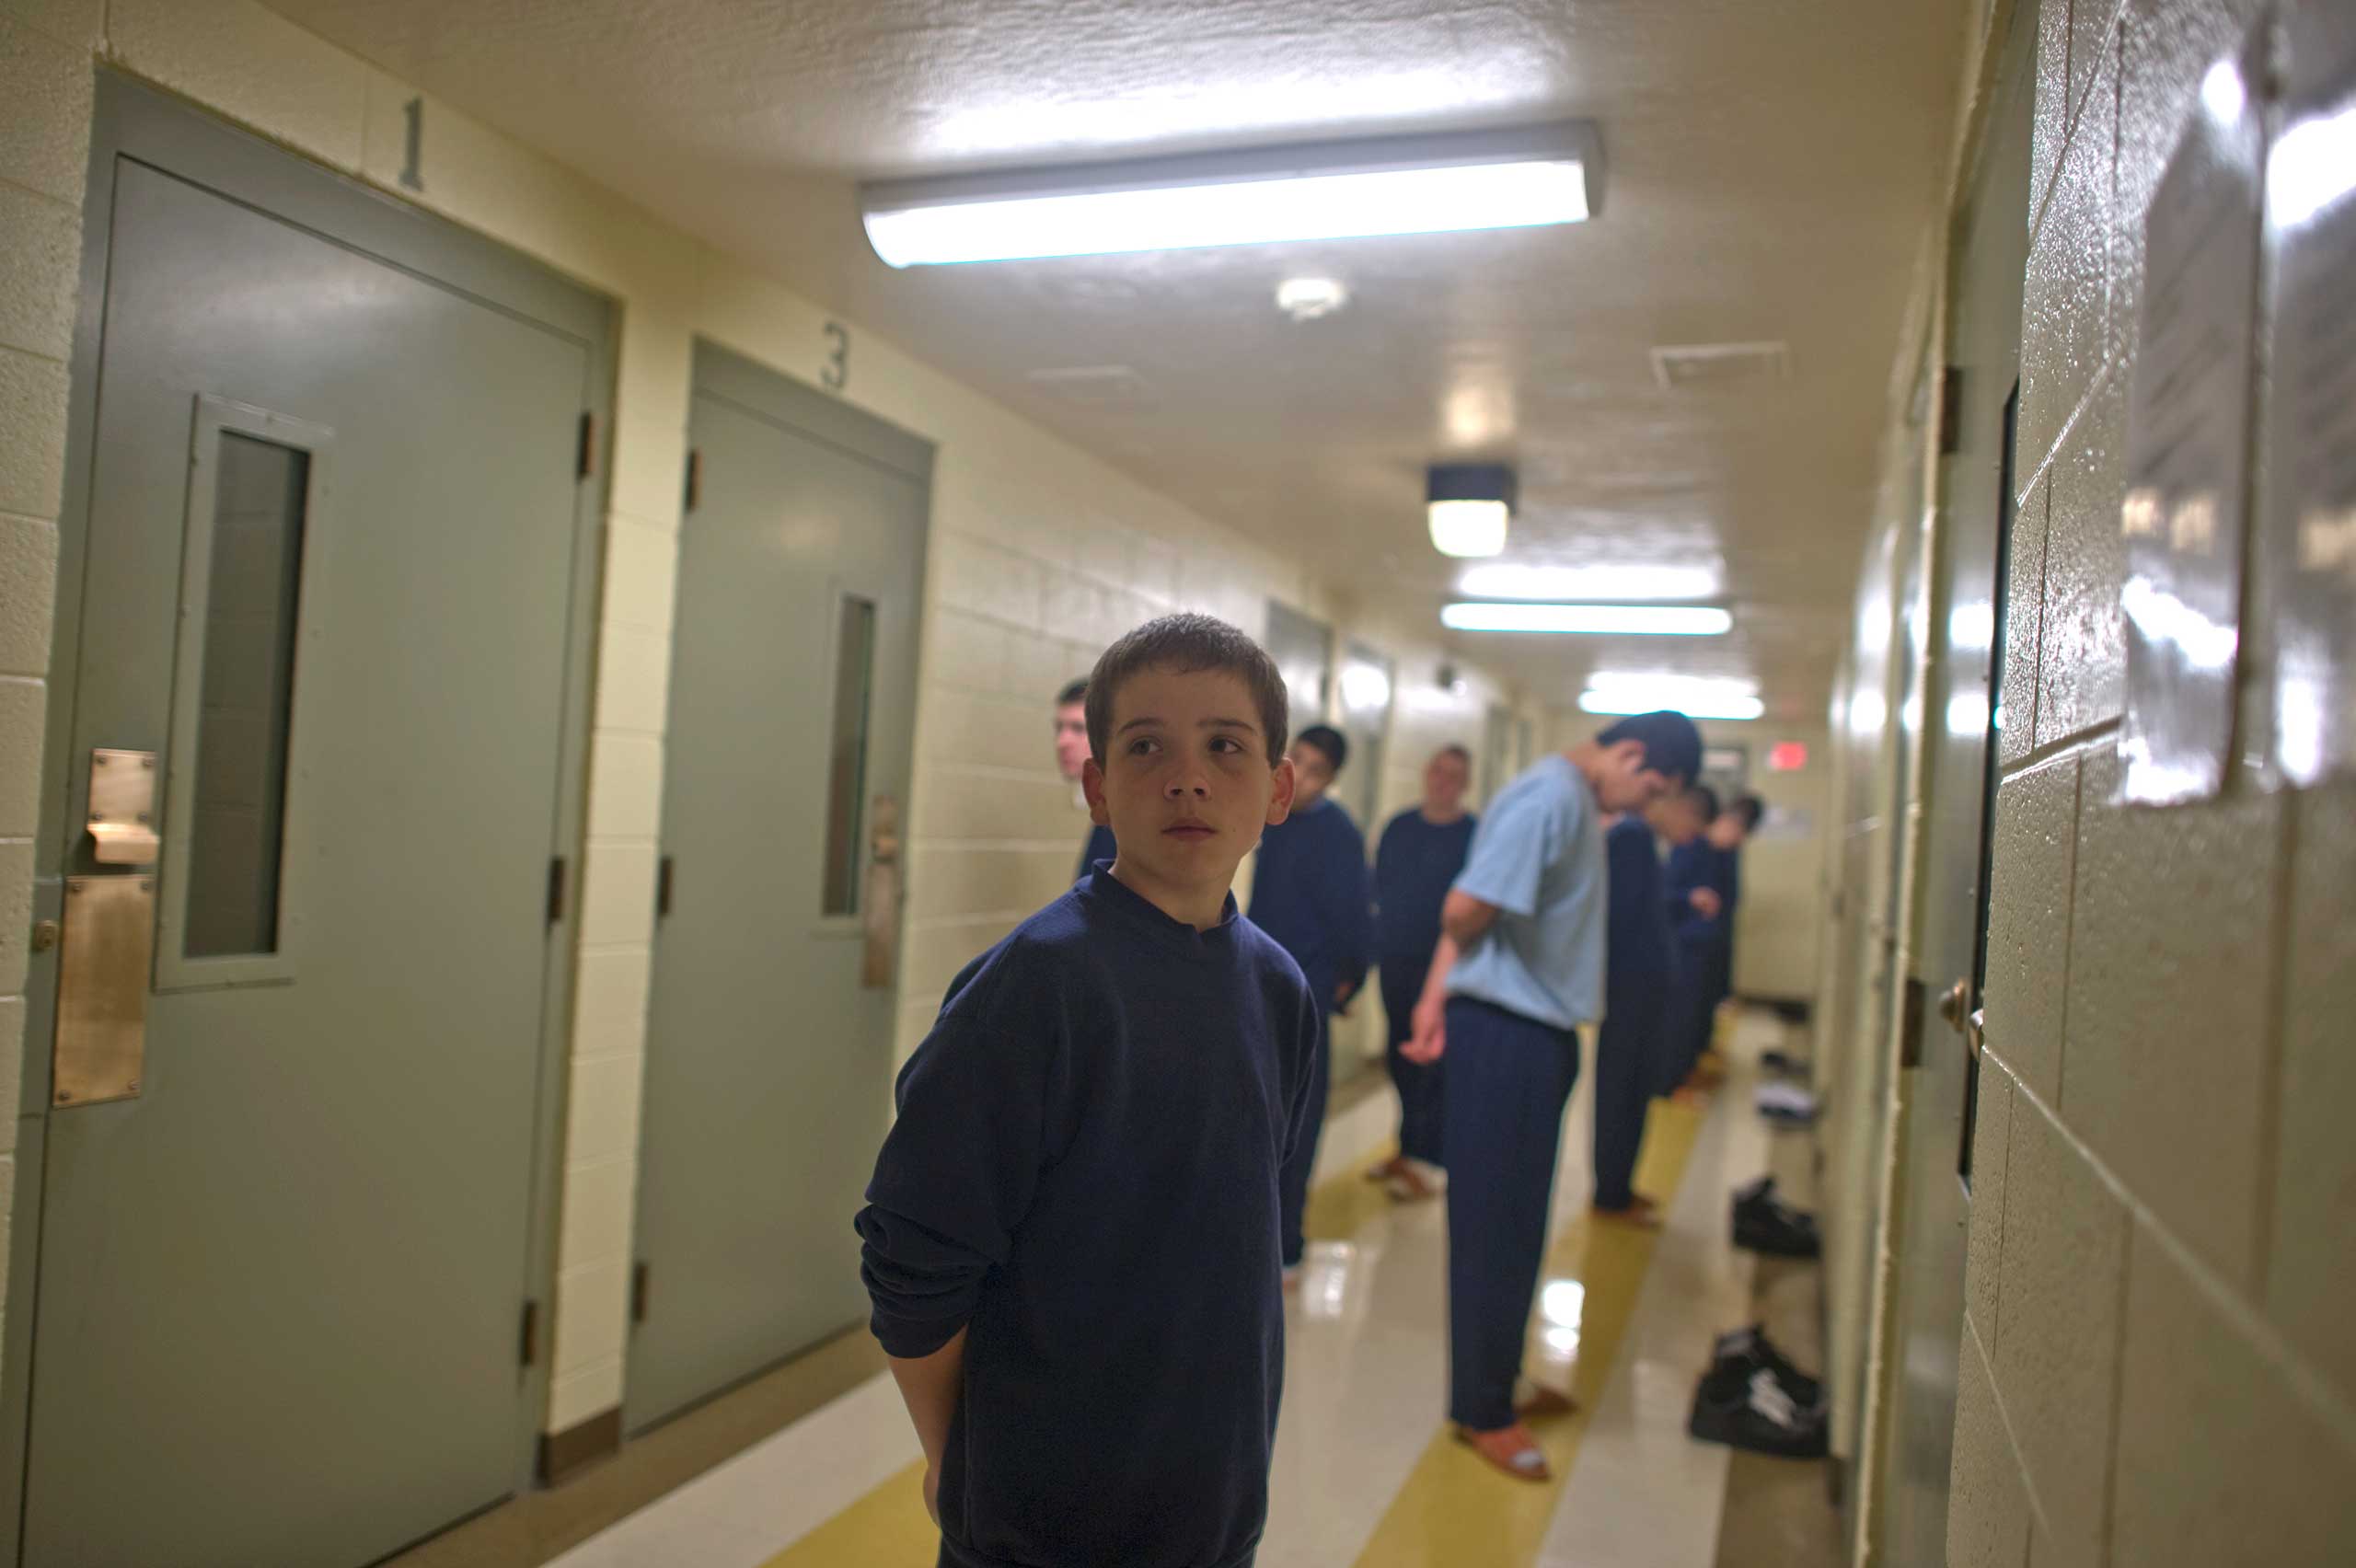 Vinny, 13, stands in command call before entering his cell at the juvenile detention center.